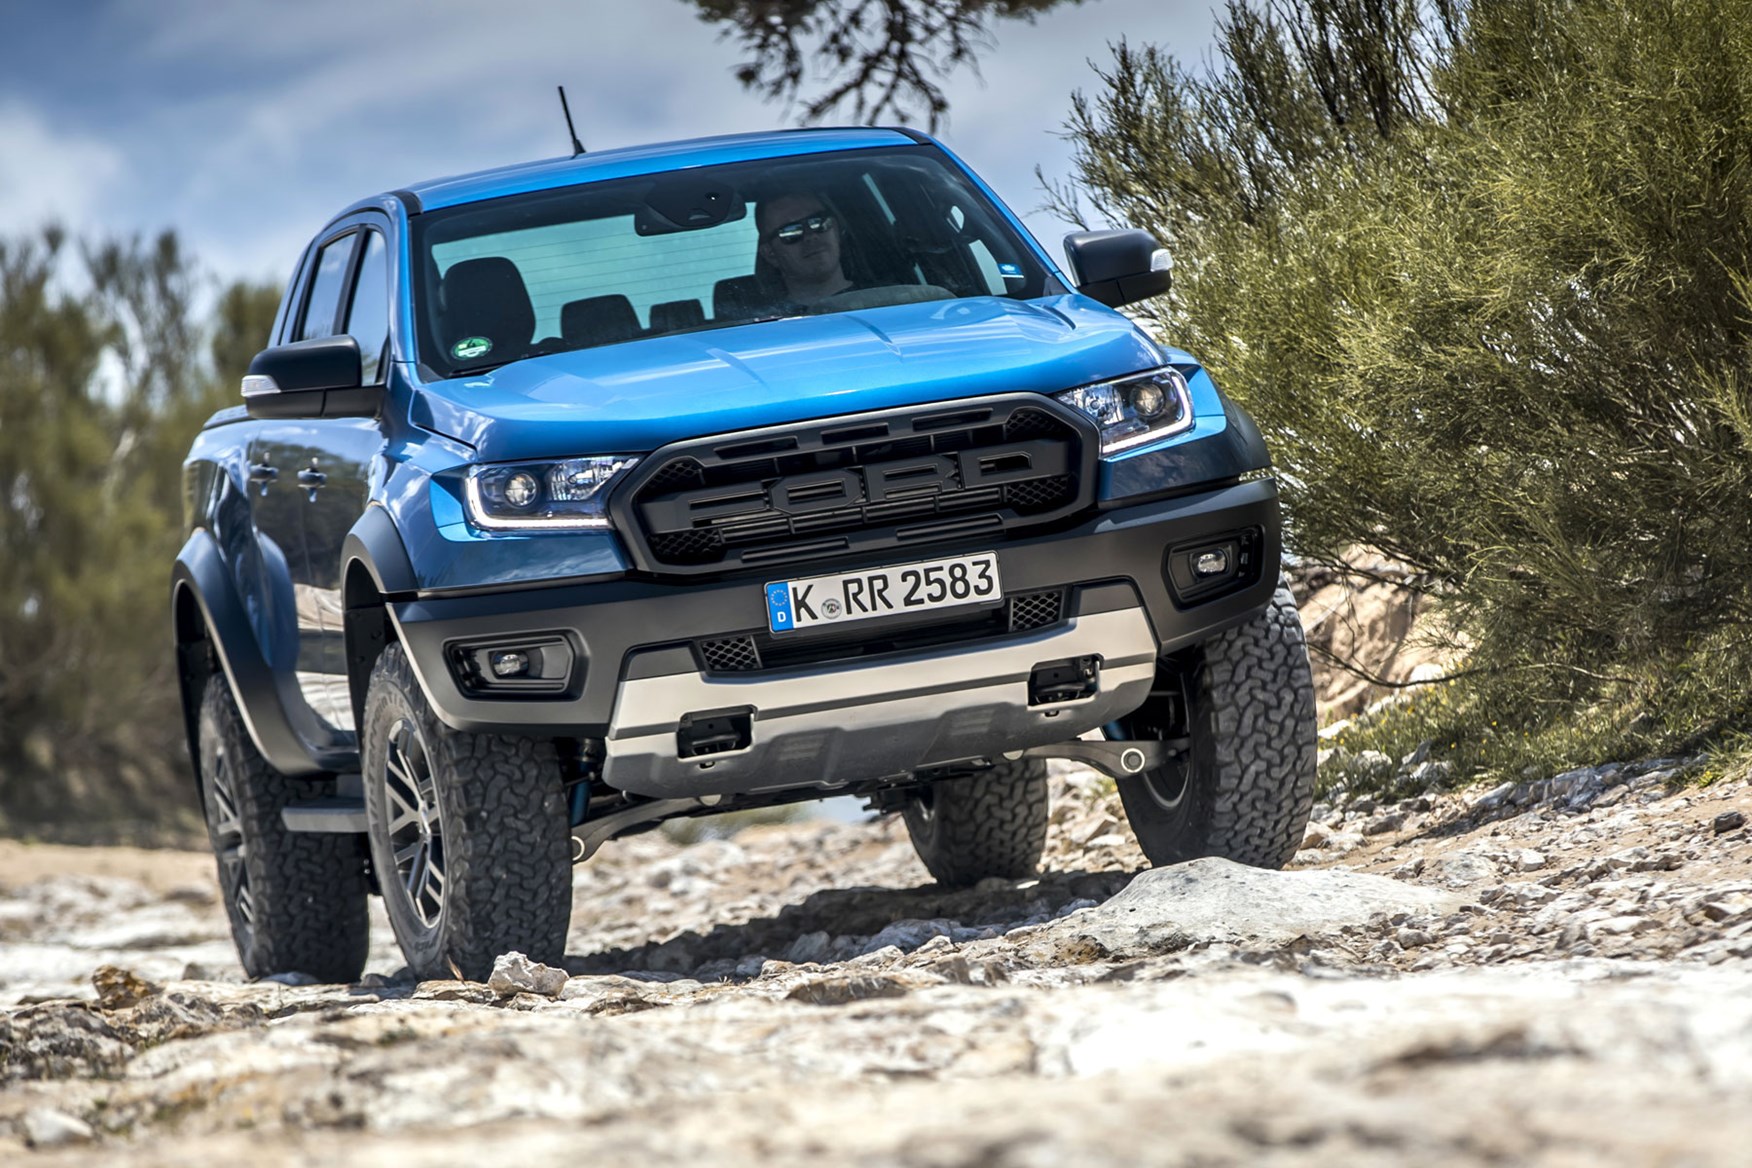 Ford Ranger Raptor high performance pickup truck - Performance Blue, front view, on rocks